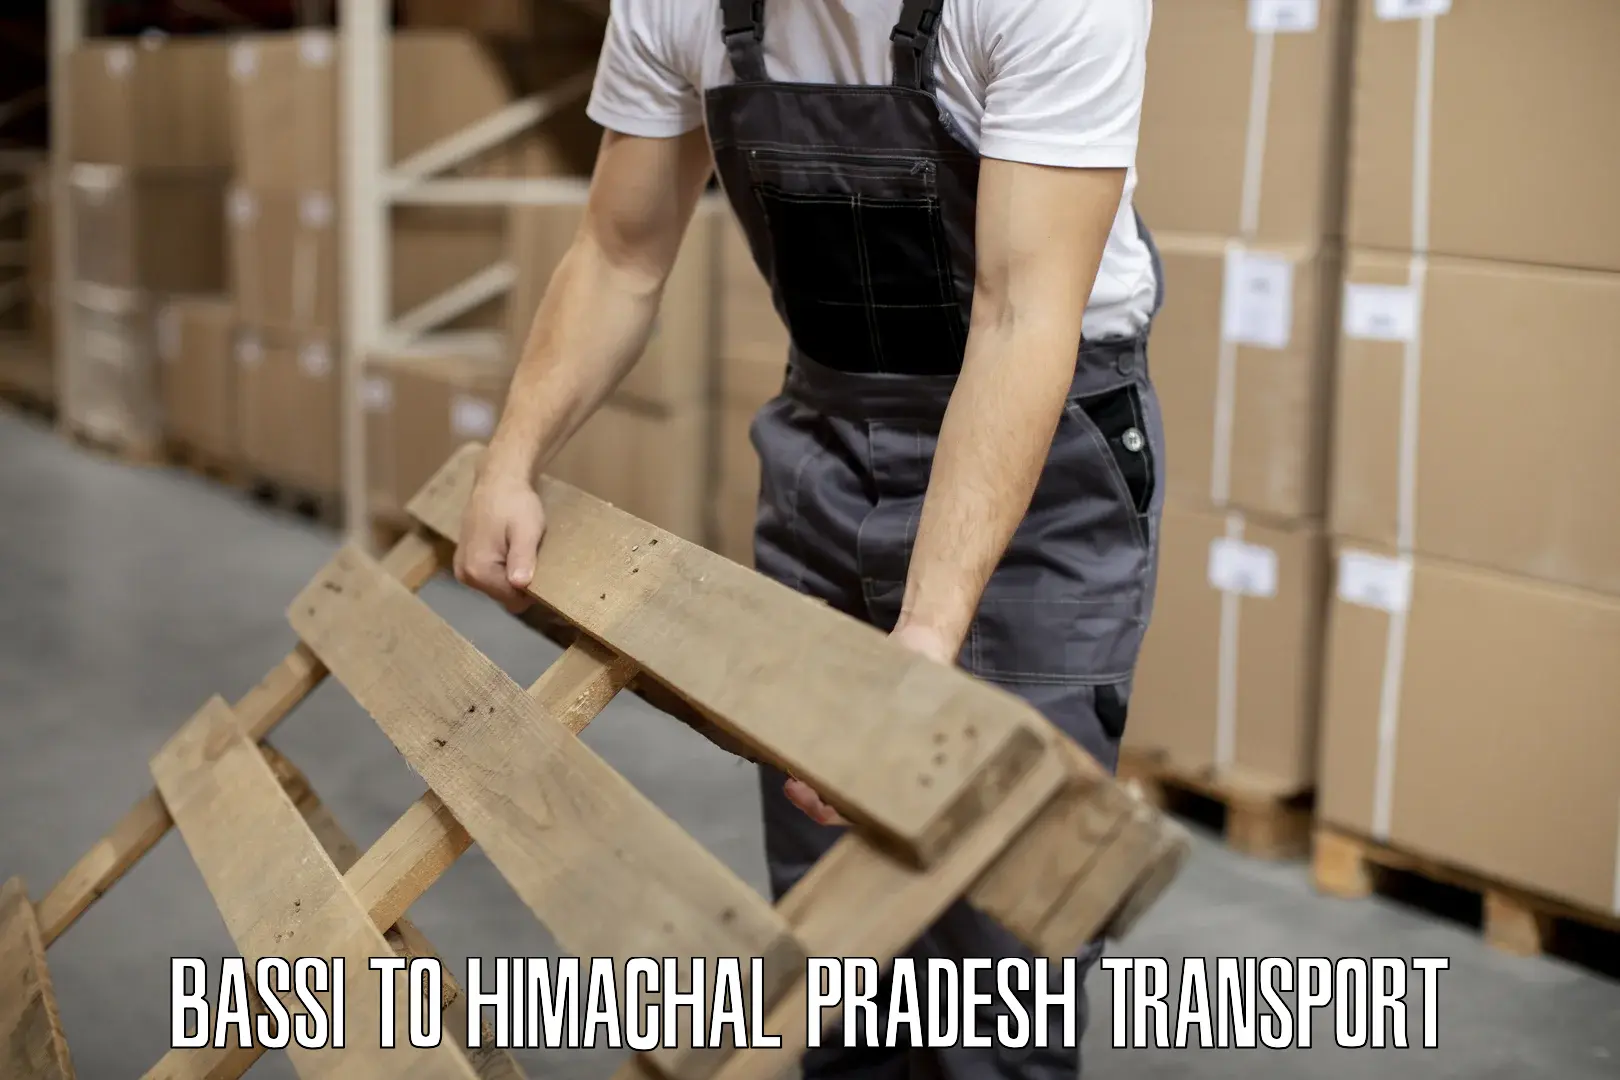 Part load transport service in India Bassi to Himachal Pradesh